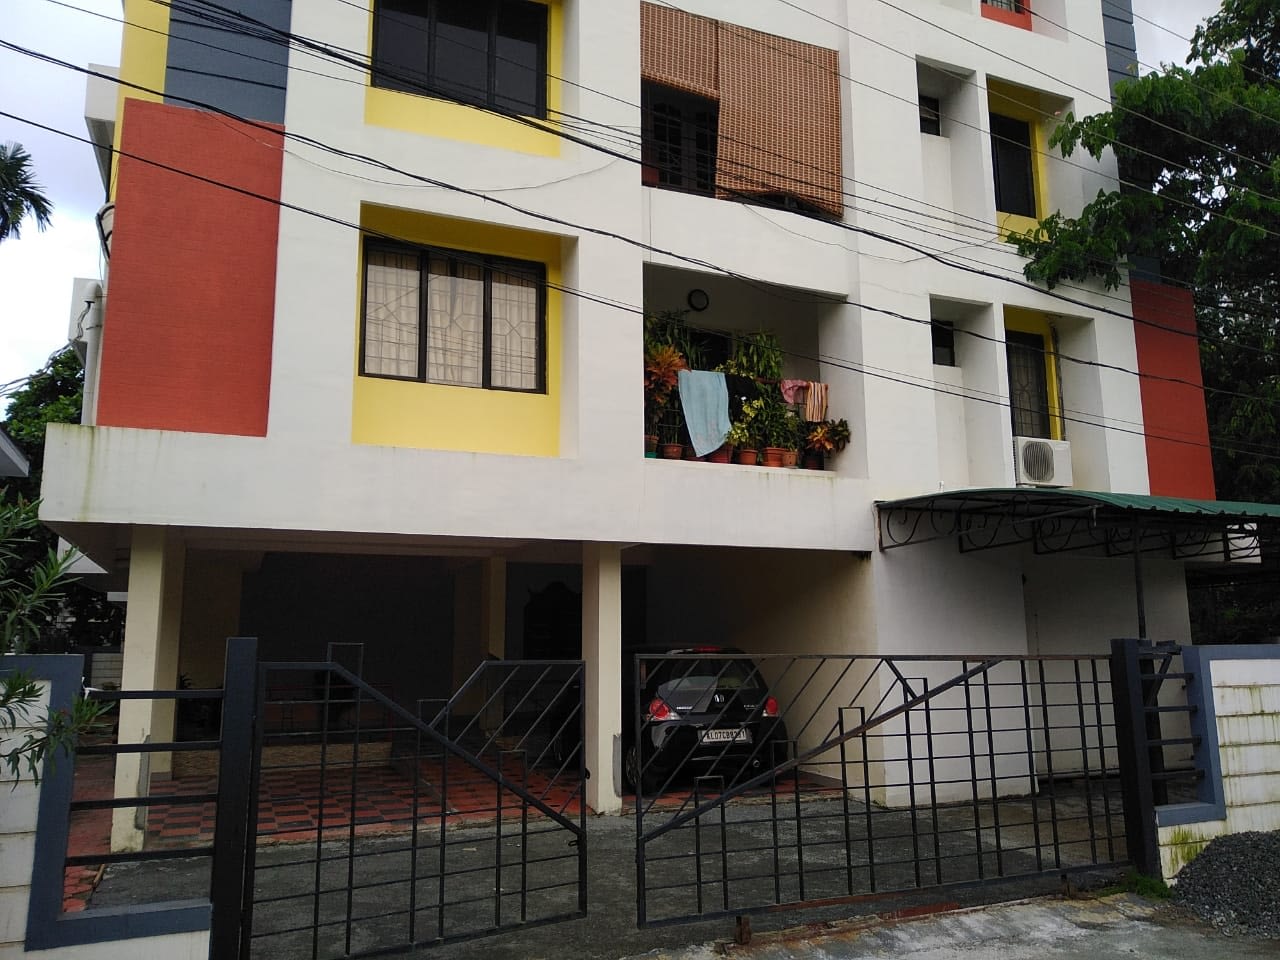 3 Bedroom Apartment for Sale in Panampilly Nagar